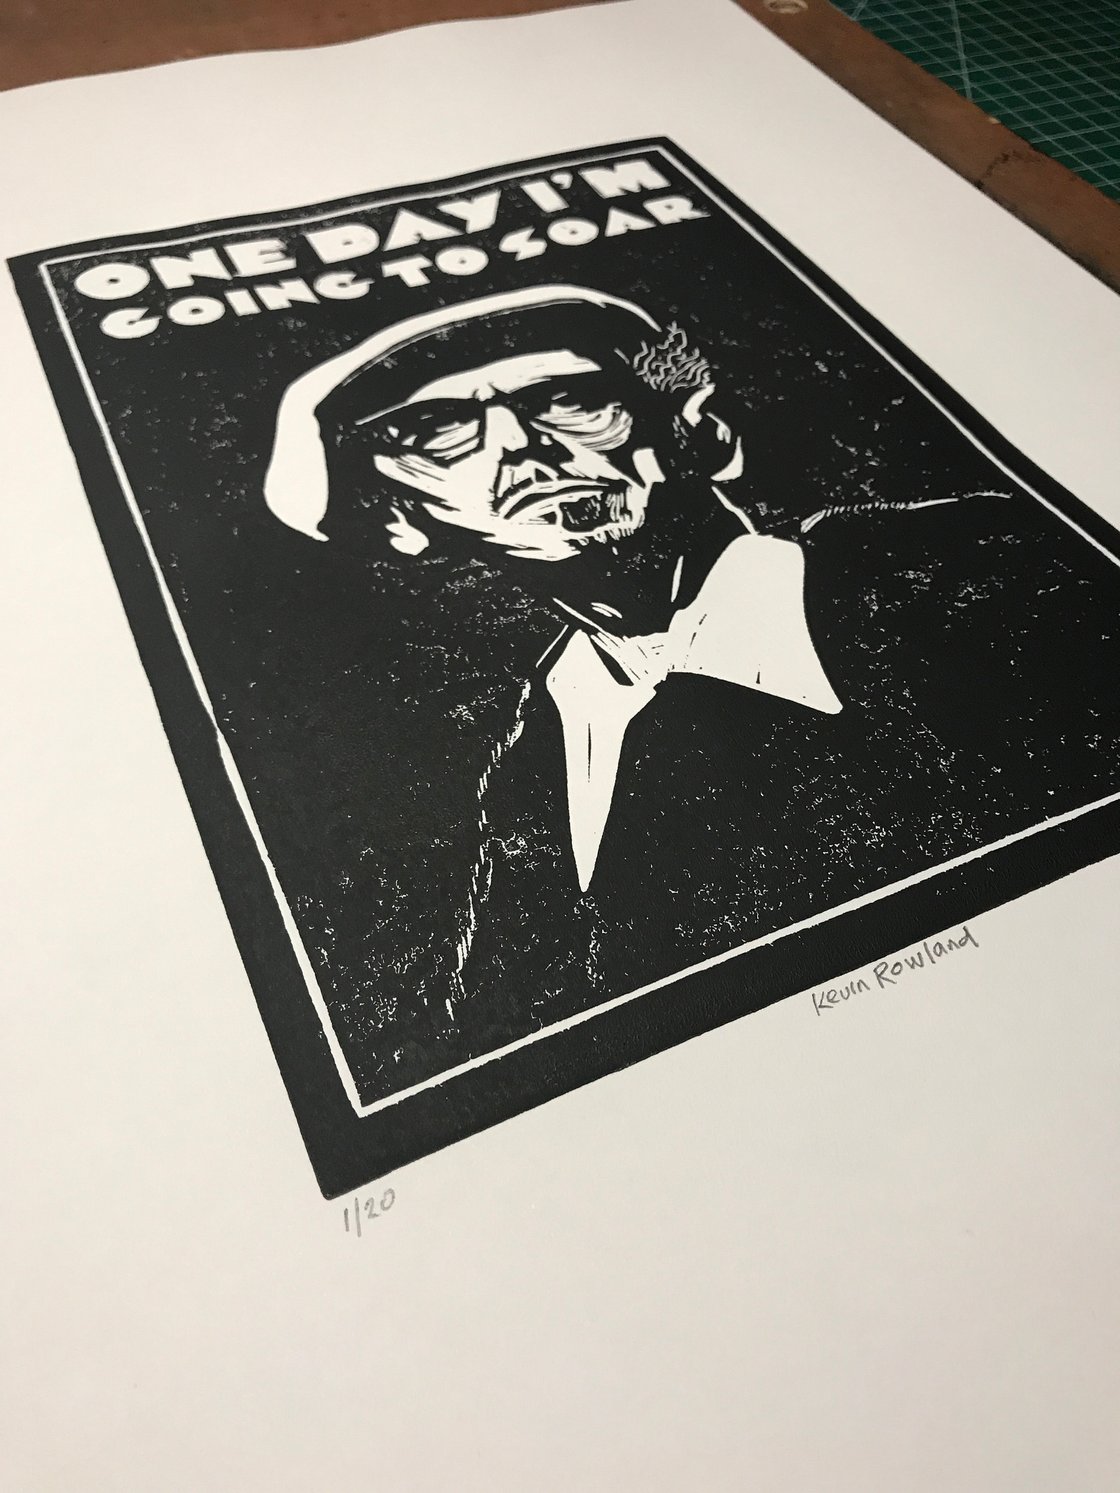 Image of Kevin Rowland. Dexys. Hand Made. Original A3. Linocut print. Limited and Signed. Art.